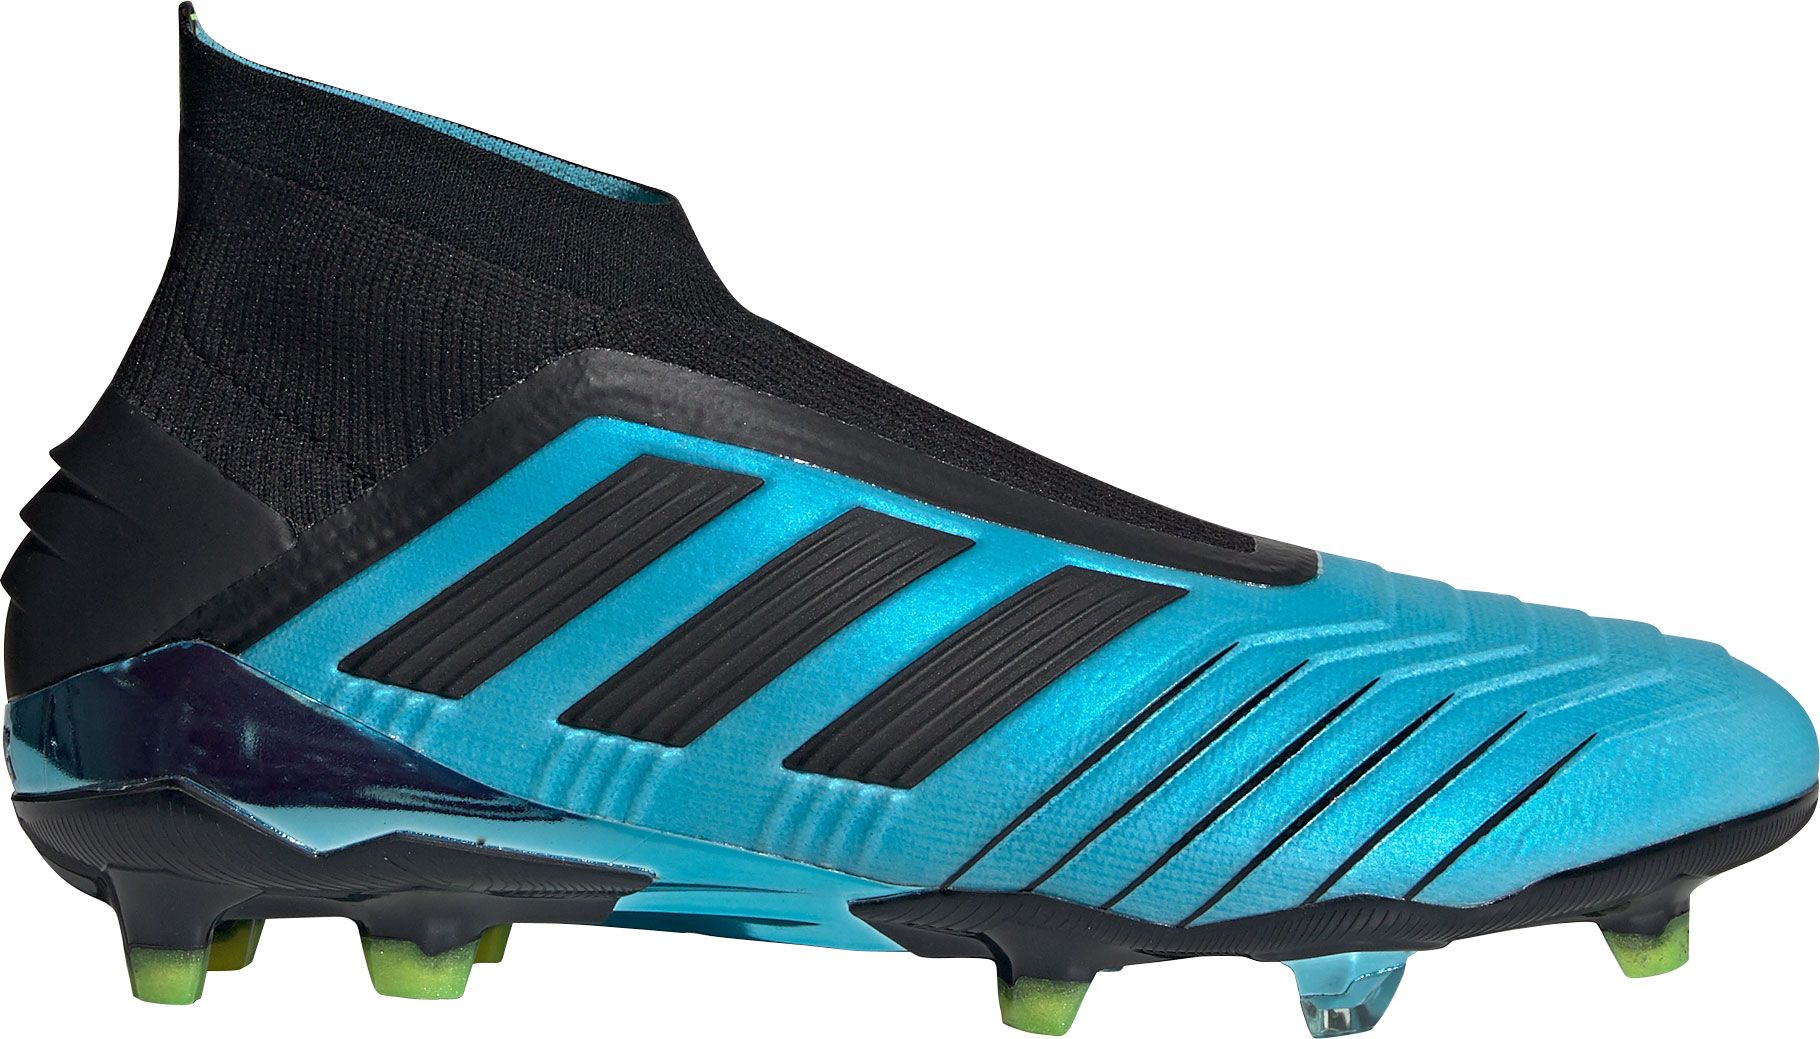 blue and black adidas soccer cleats